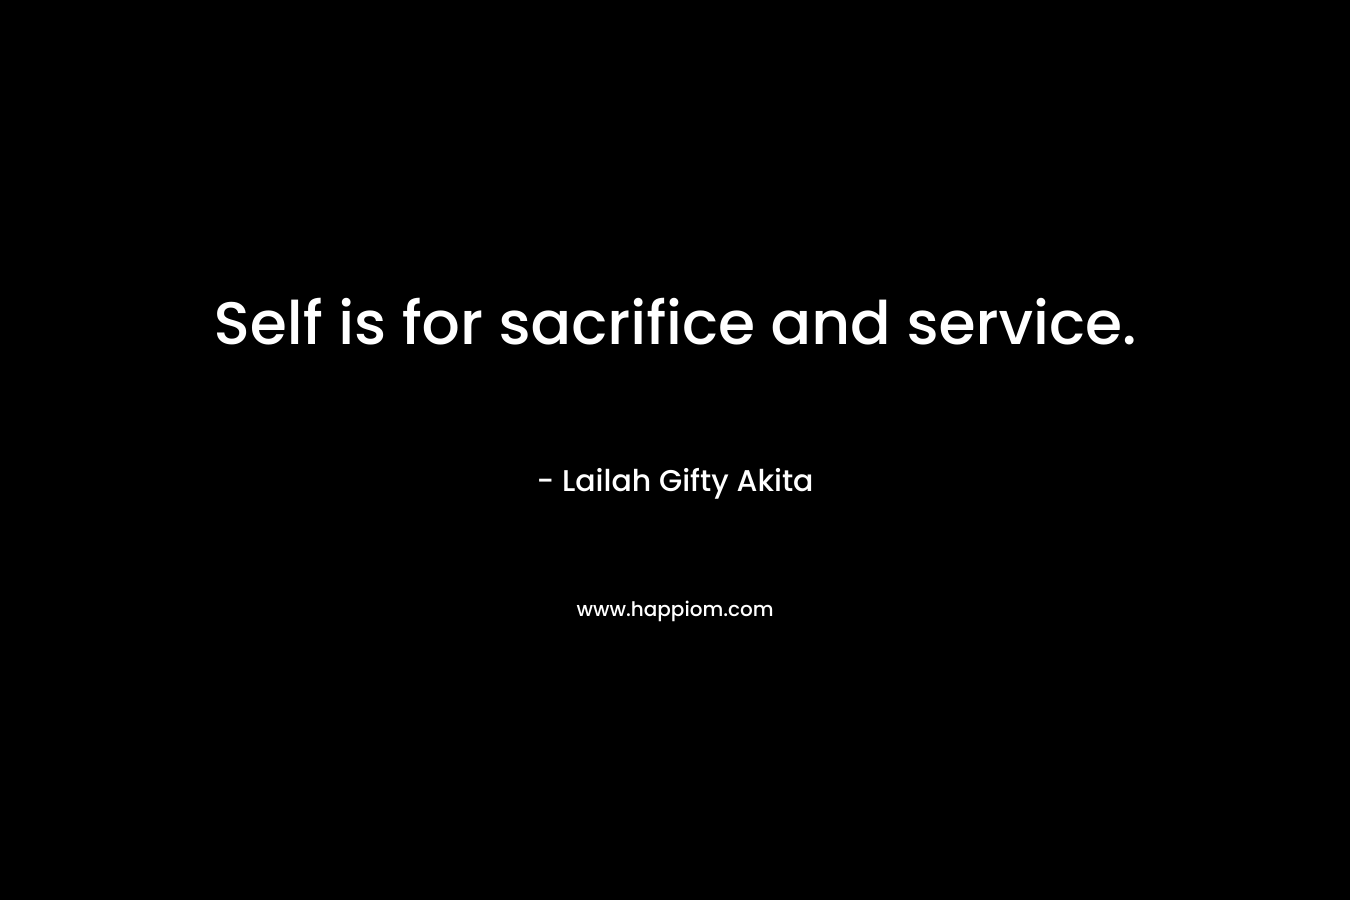 Self is for sacrifice and service.